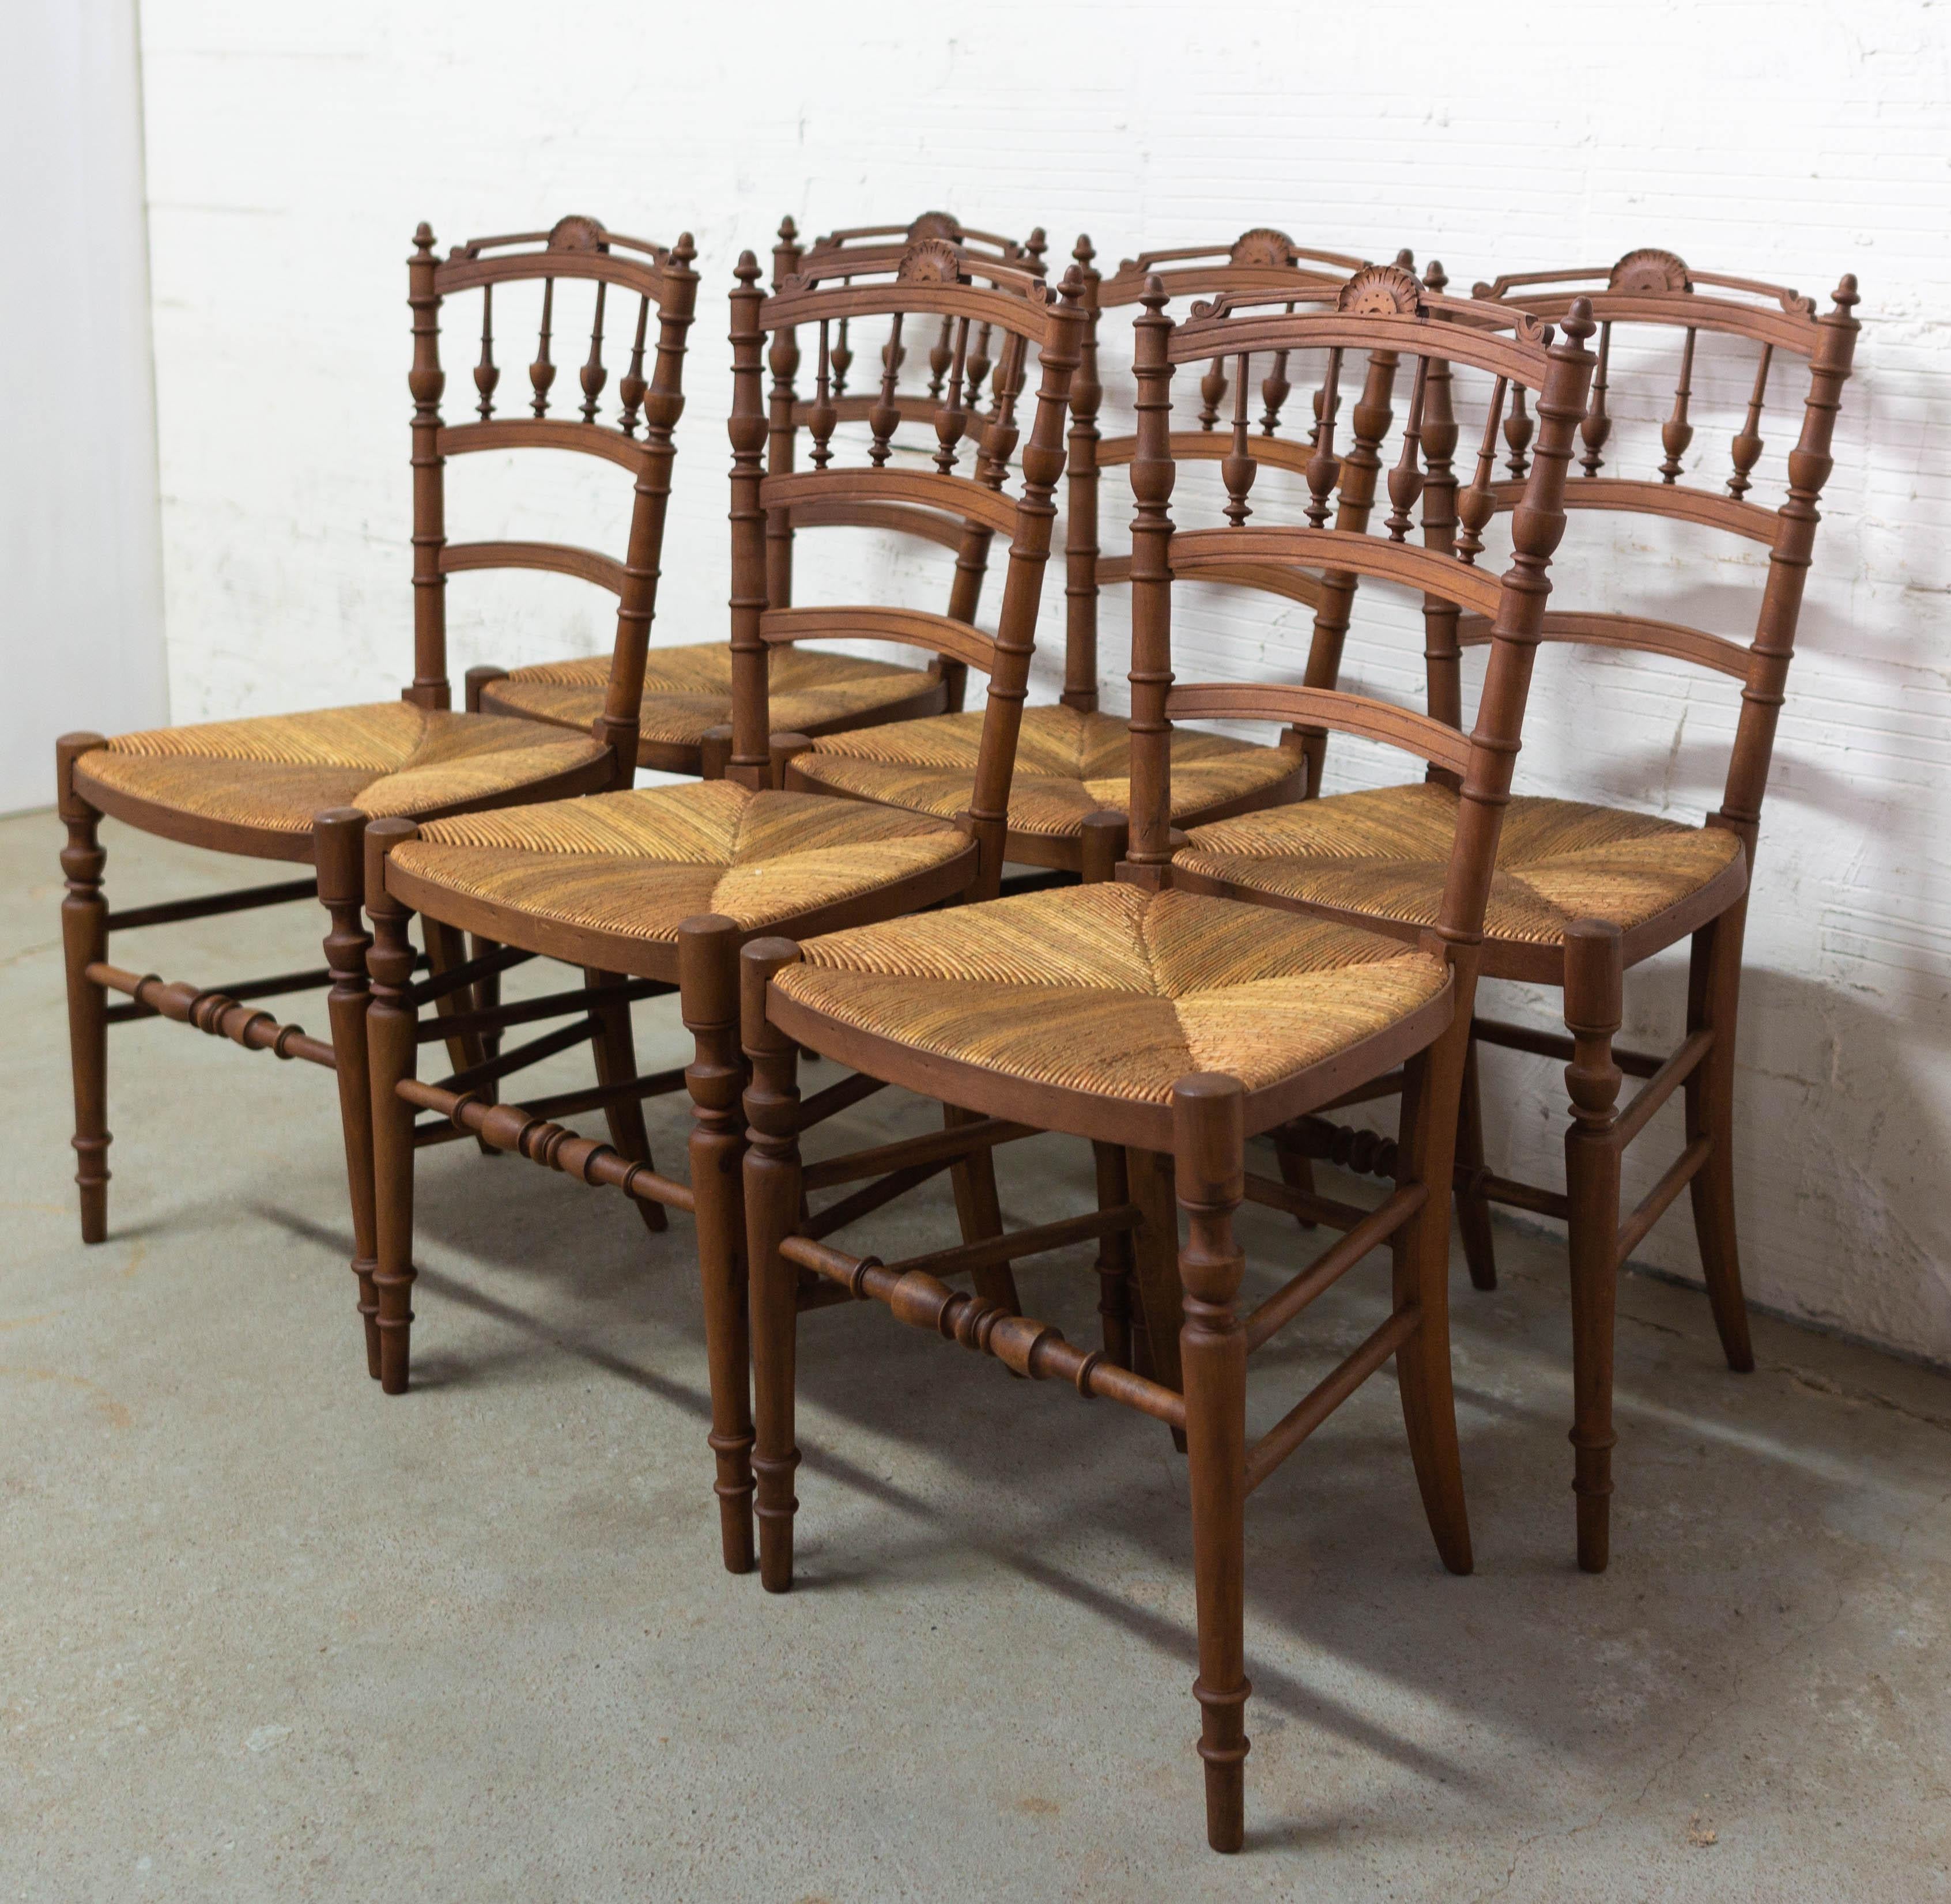 Six dining chairs French with baluster backs and rush seats
In good condition, sound and solid.

Shipping:
3 packs:
L 41/ P 52/ H 90 6.8 kg each.